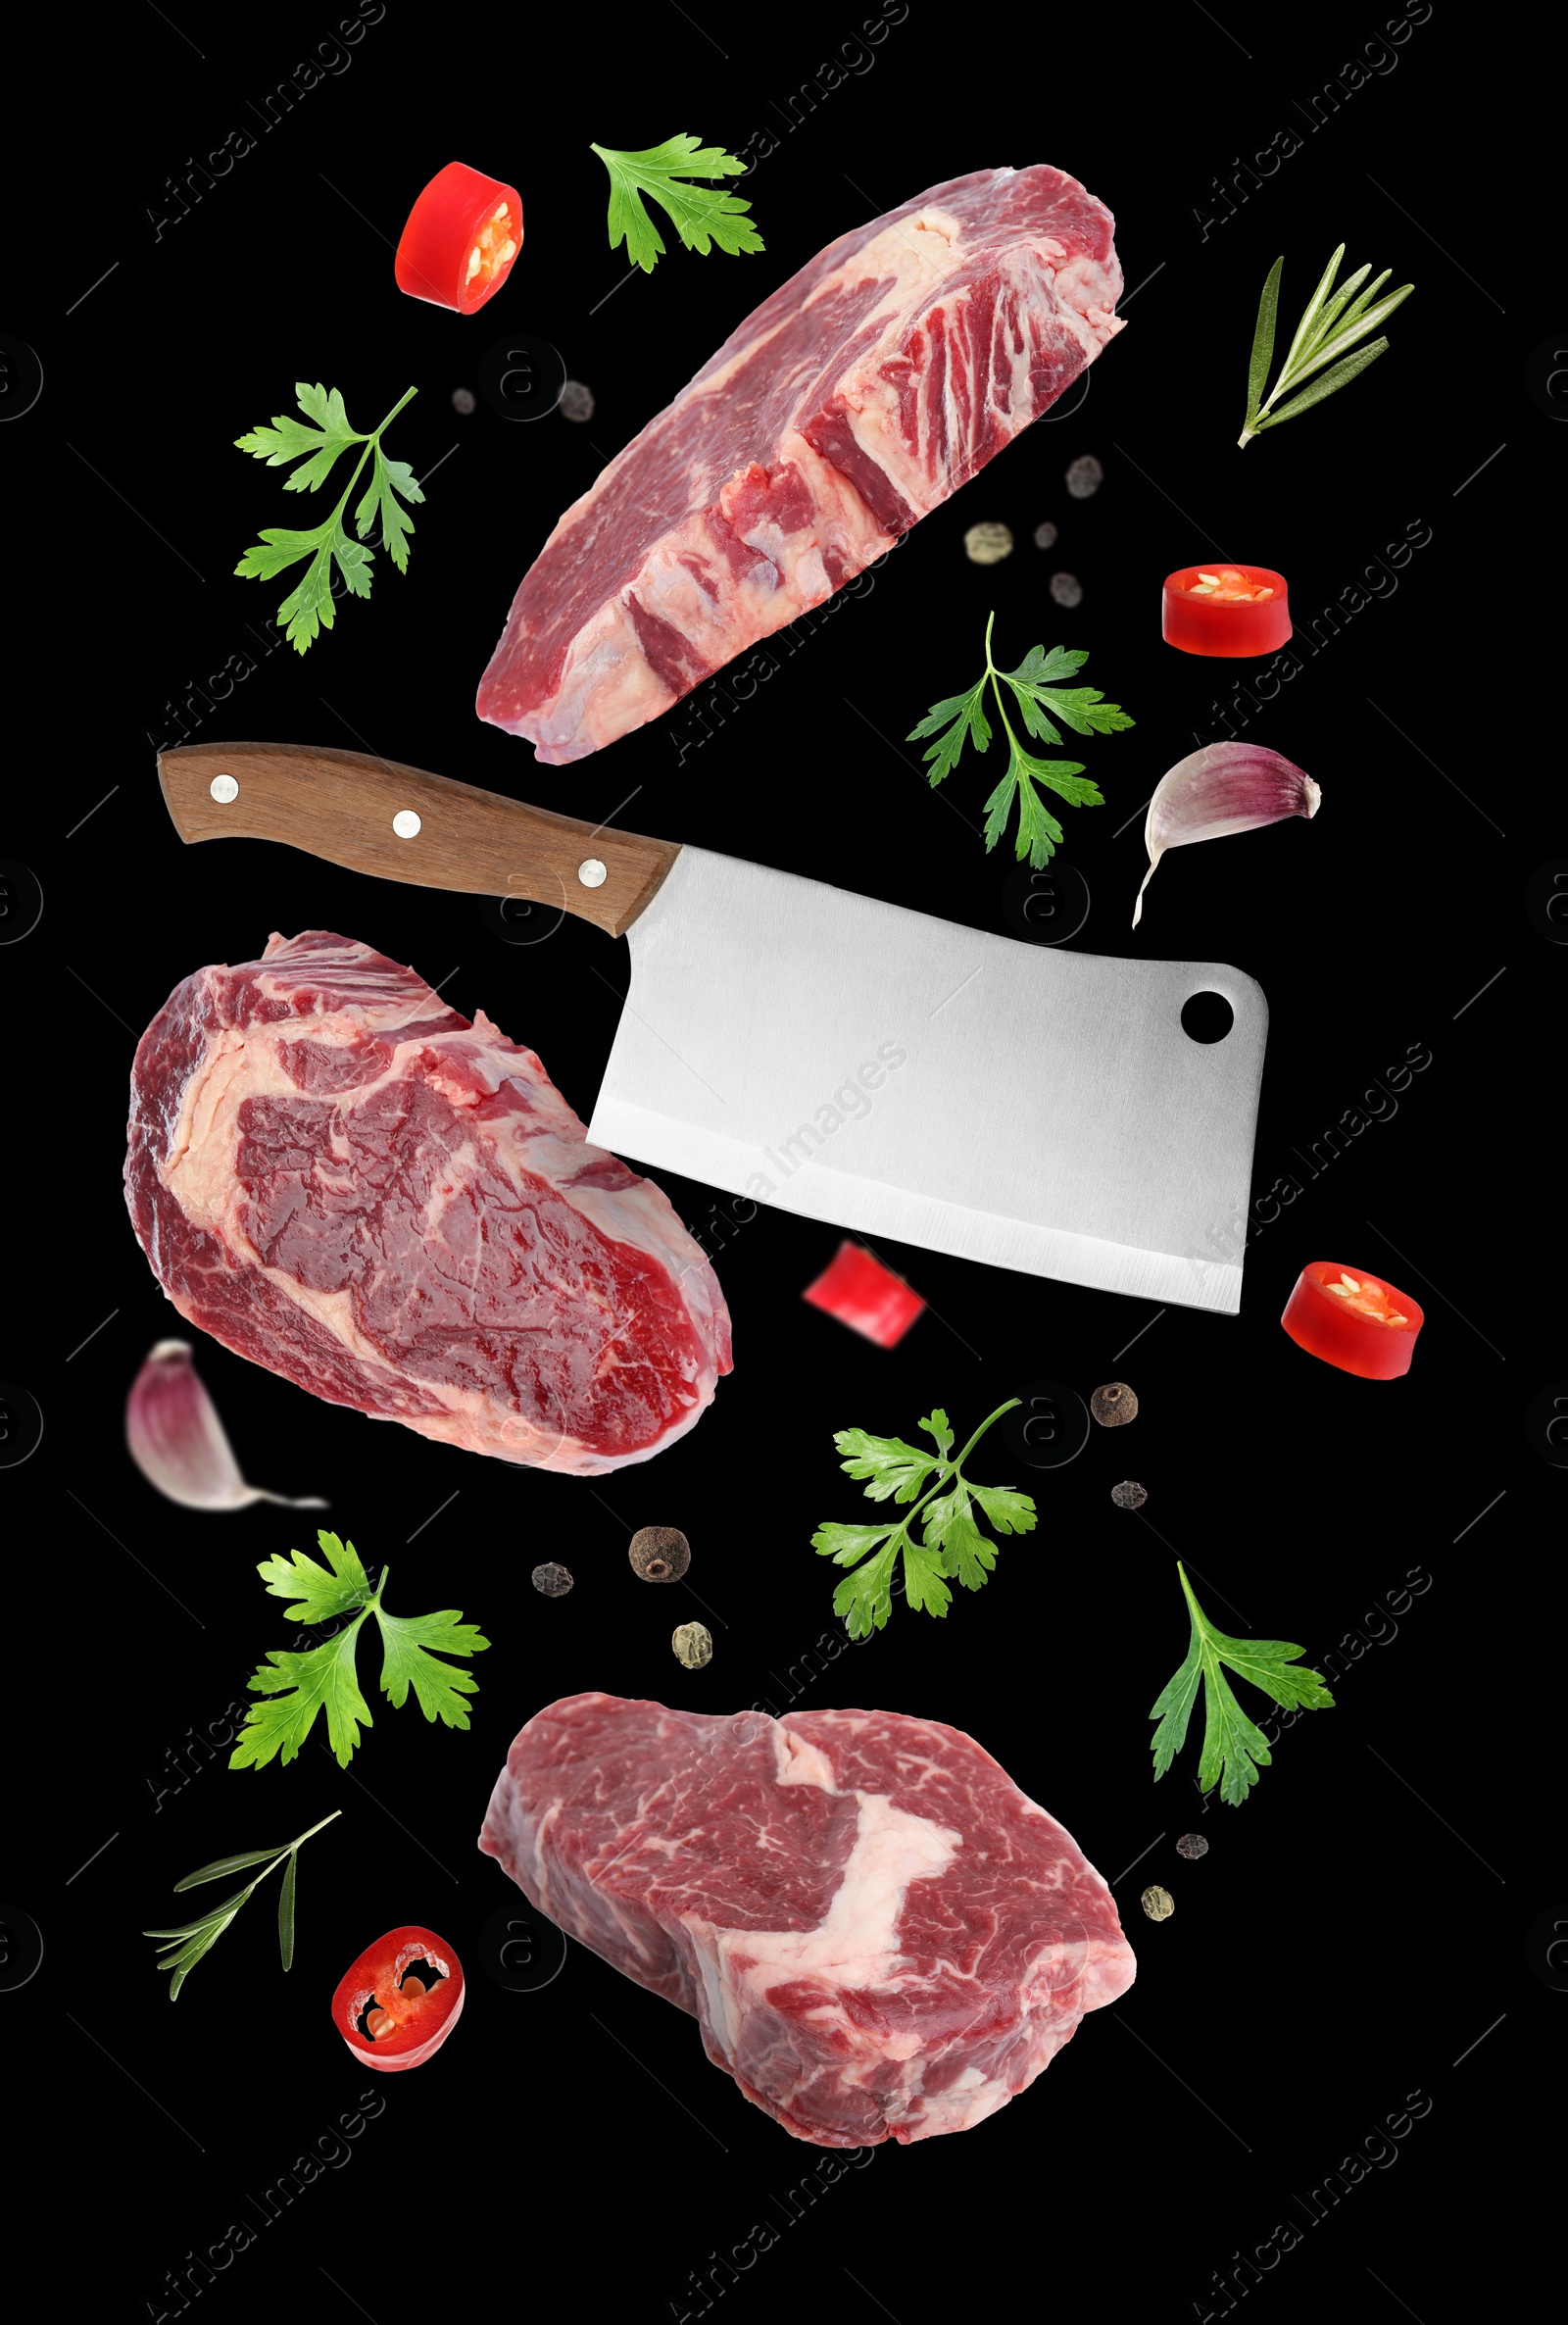 Image of Beef meat, different spices and cleaver knife falling on black background